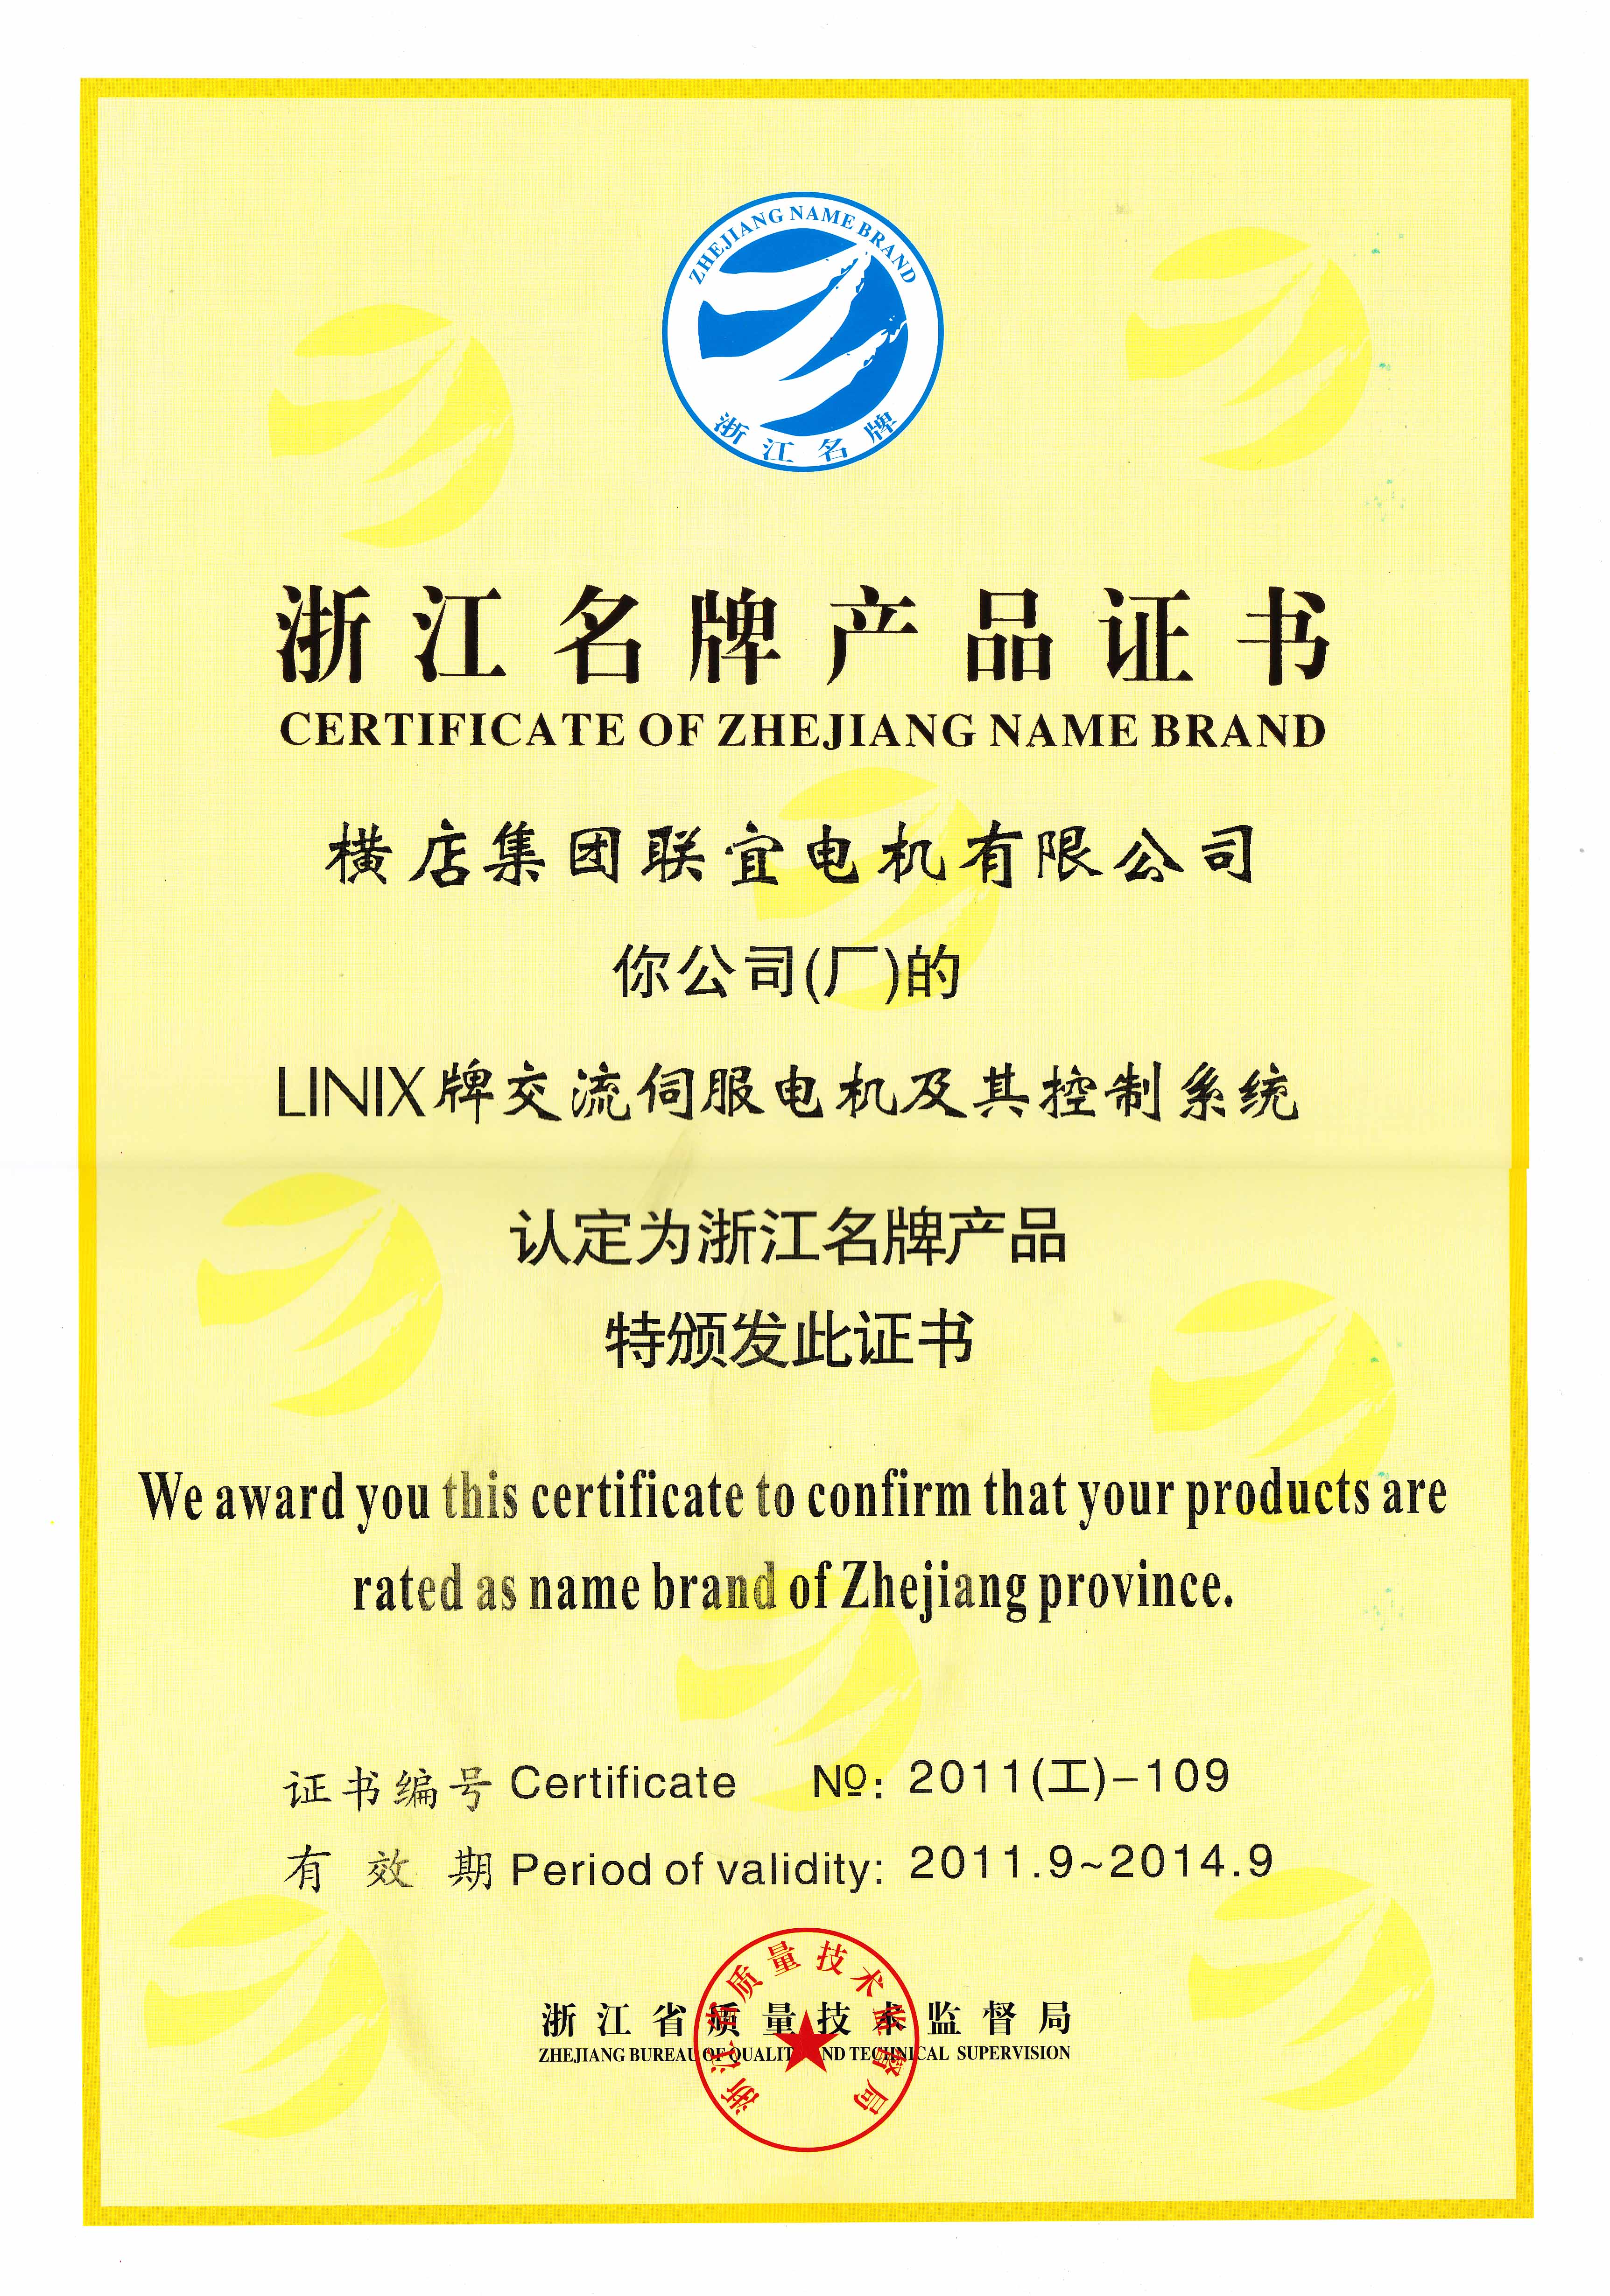 Zhejiang famous brand product certificate - linix servo motor and its control system